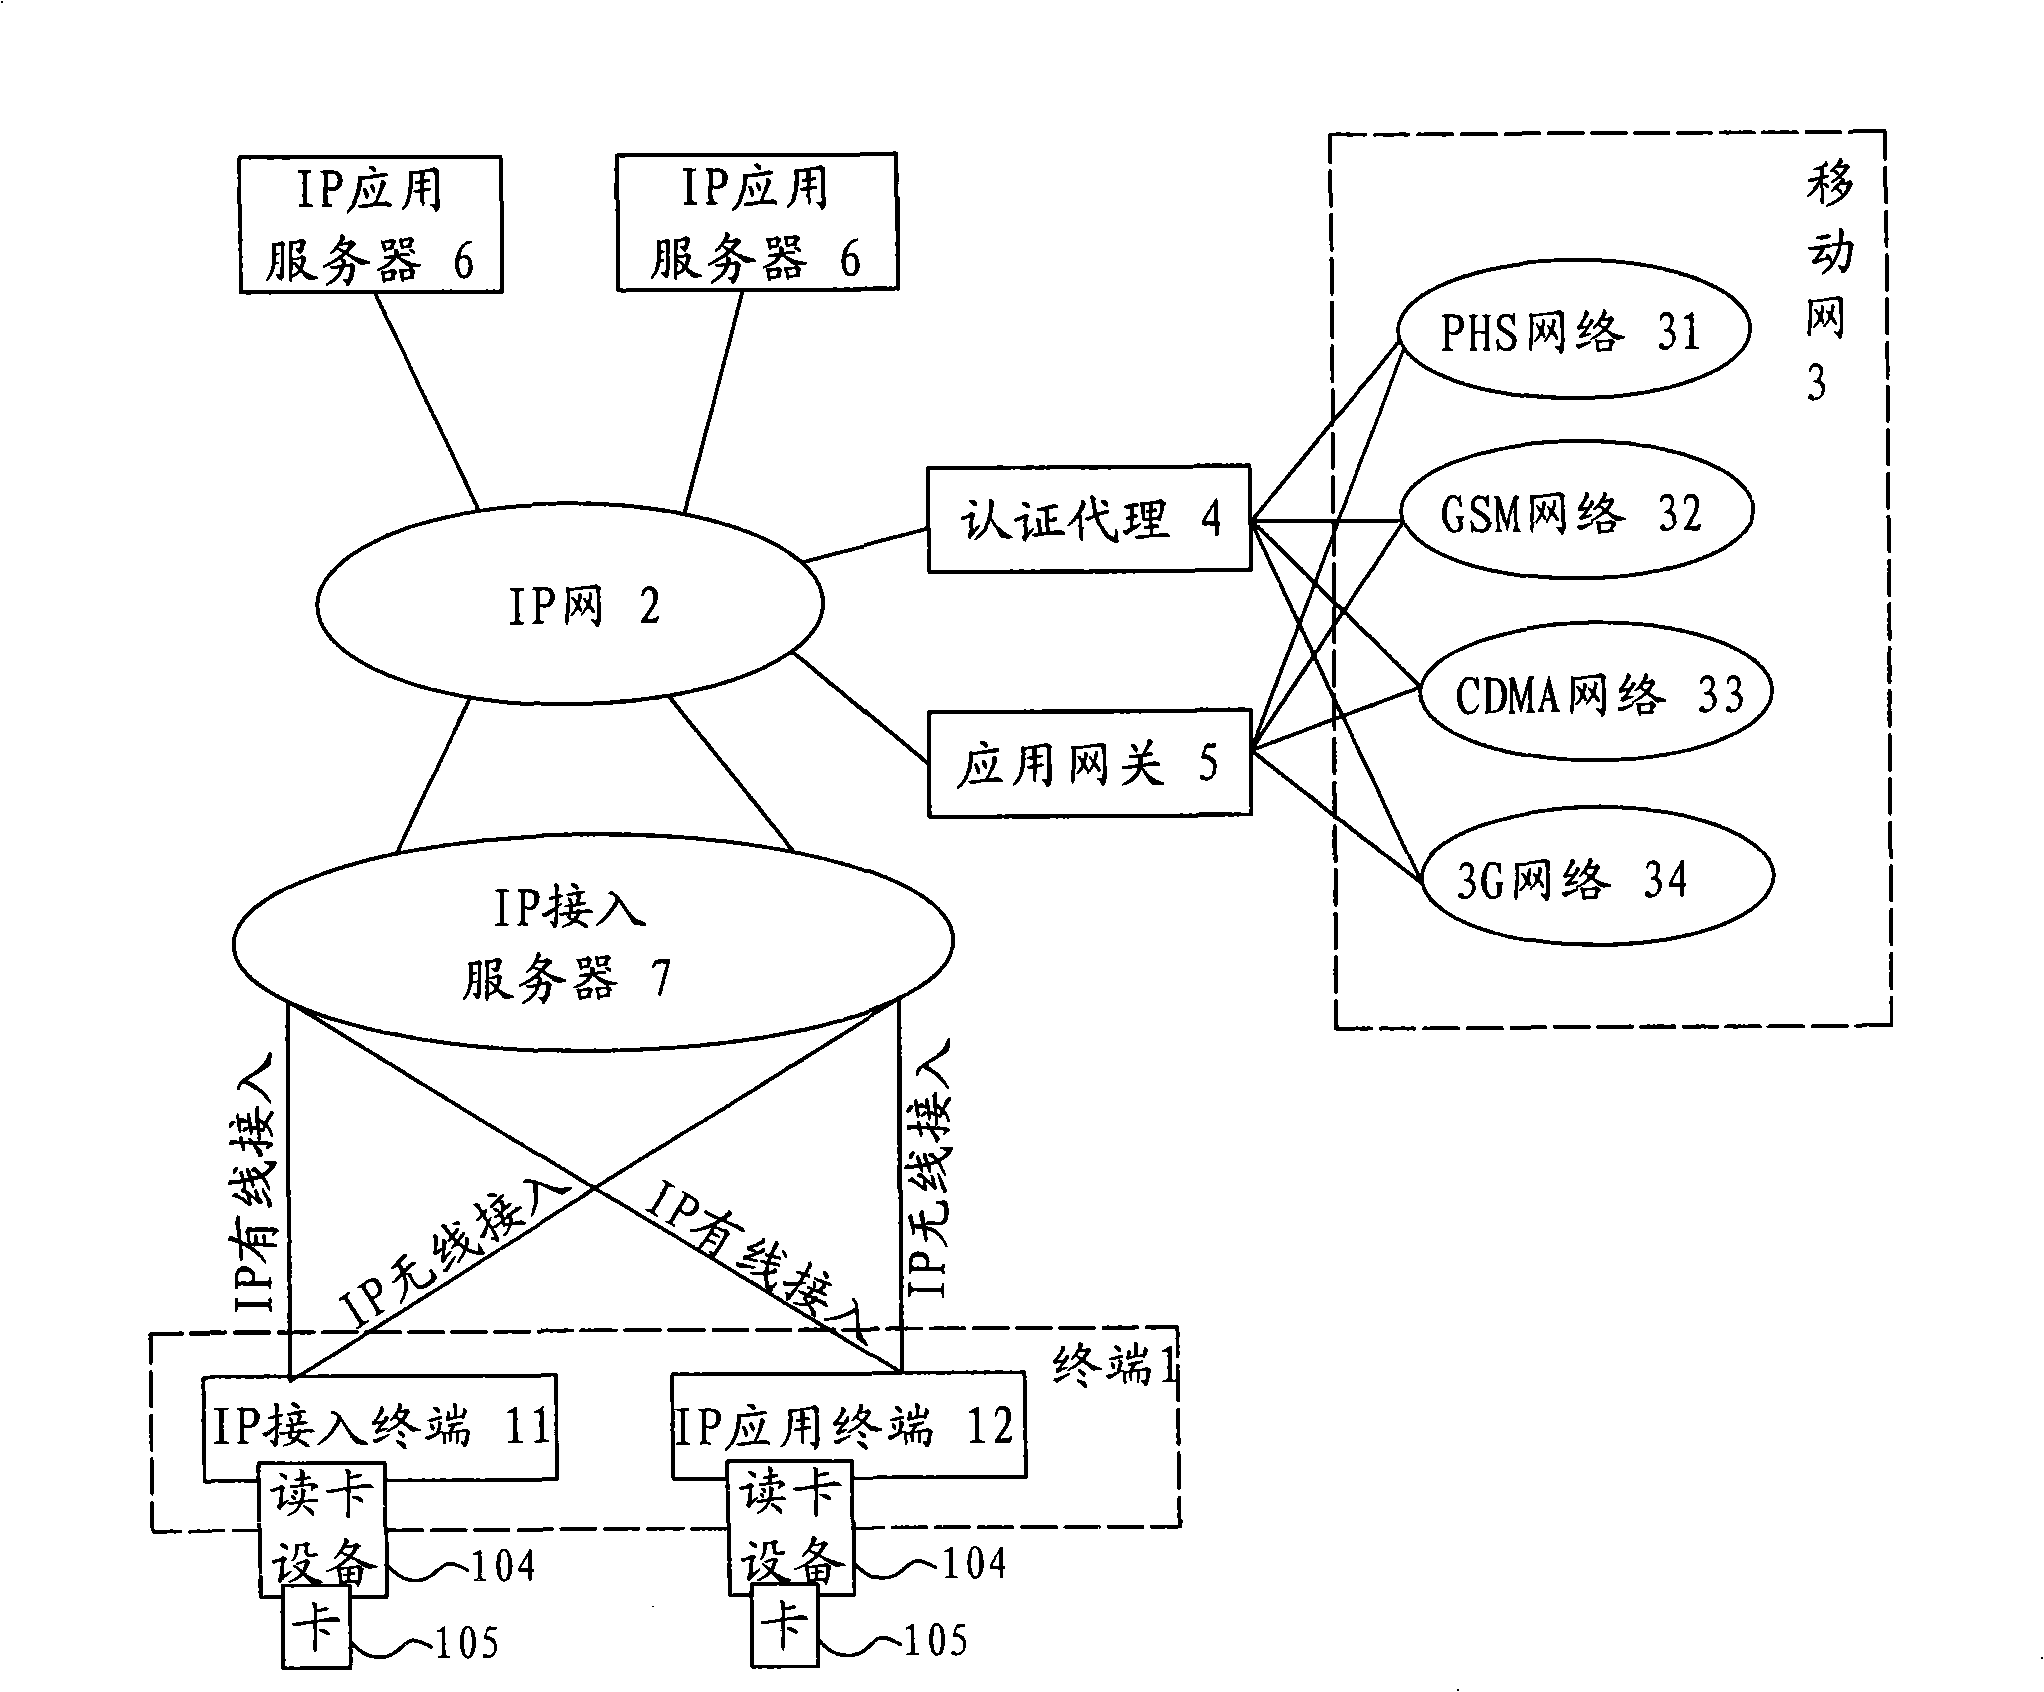 System, application and method for IP network access authentication based on personal identification module IM